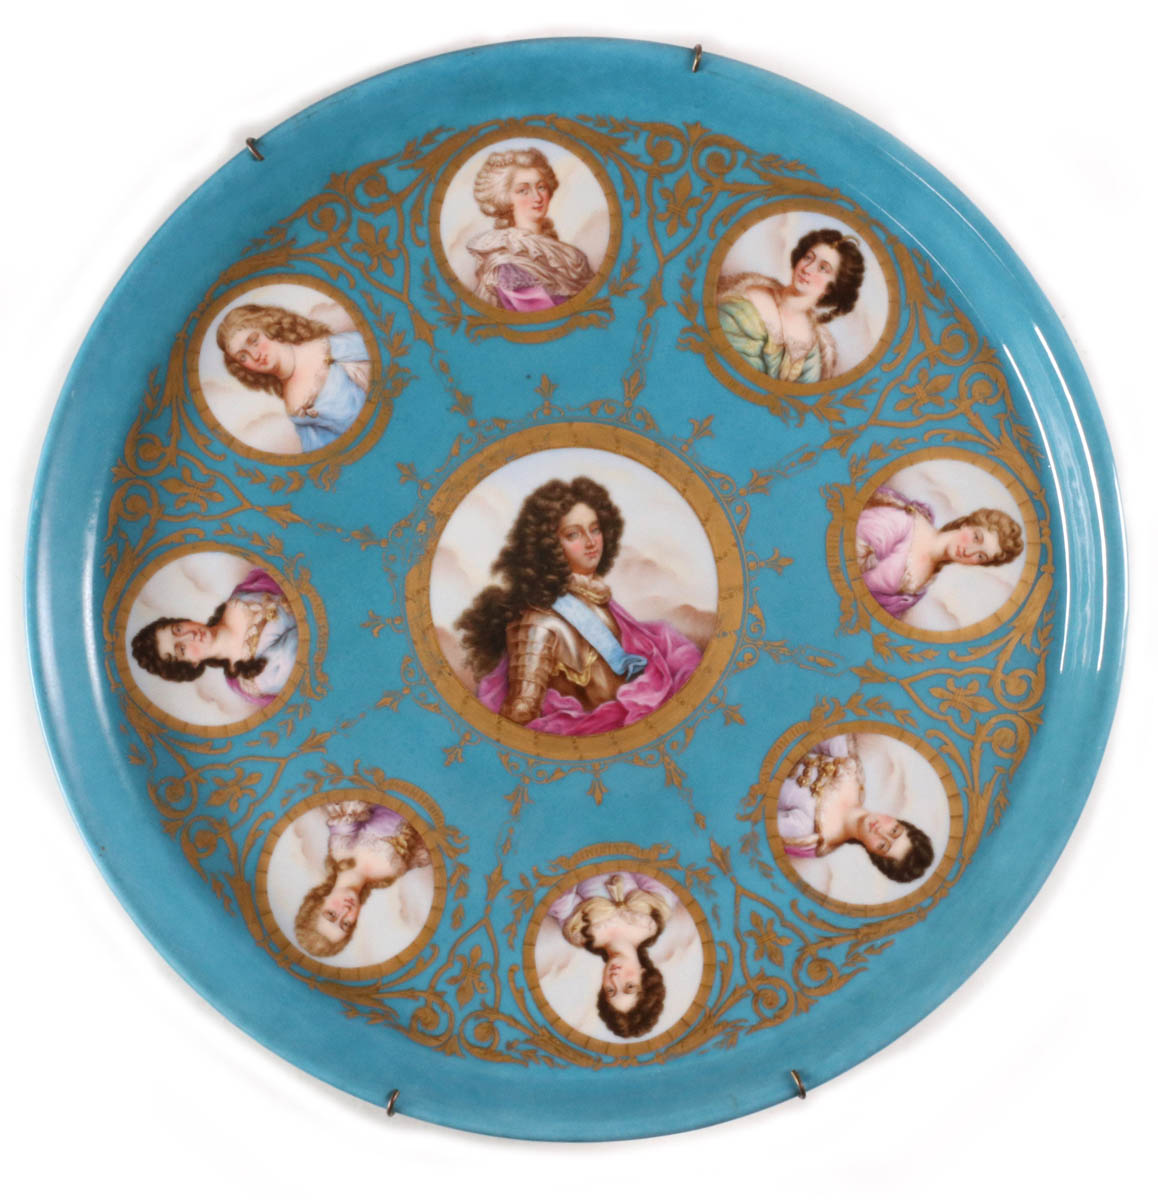 A LARGE SEVRES PORCELAIN CHARGER WITH PORTRAITS